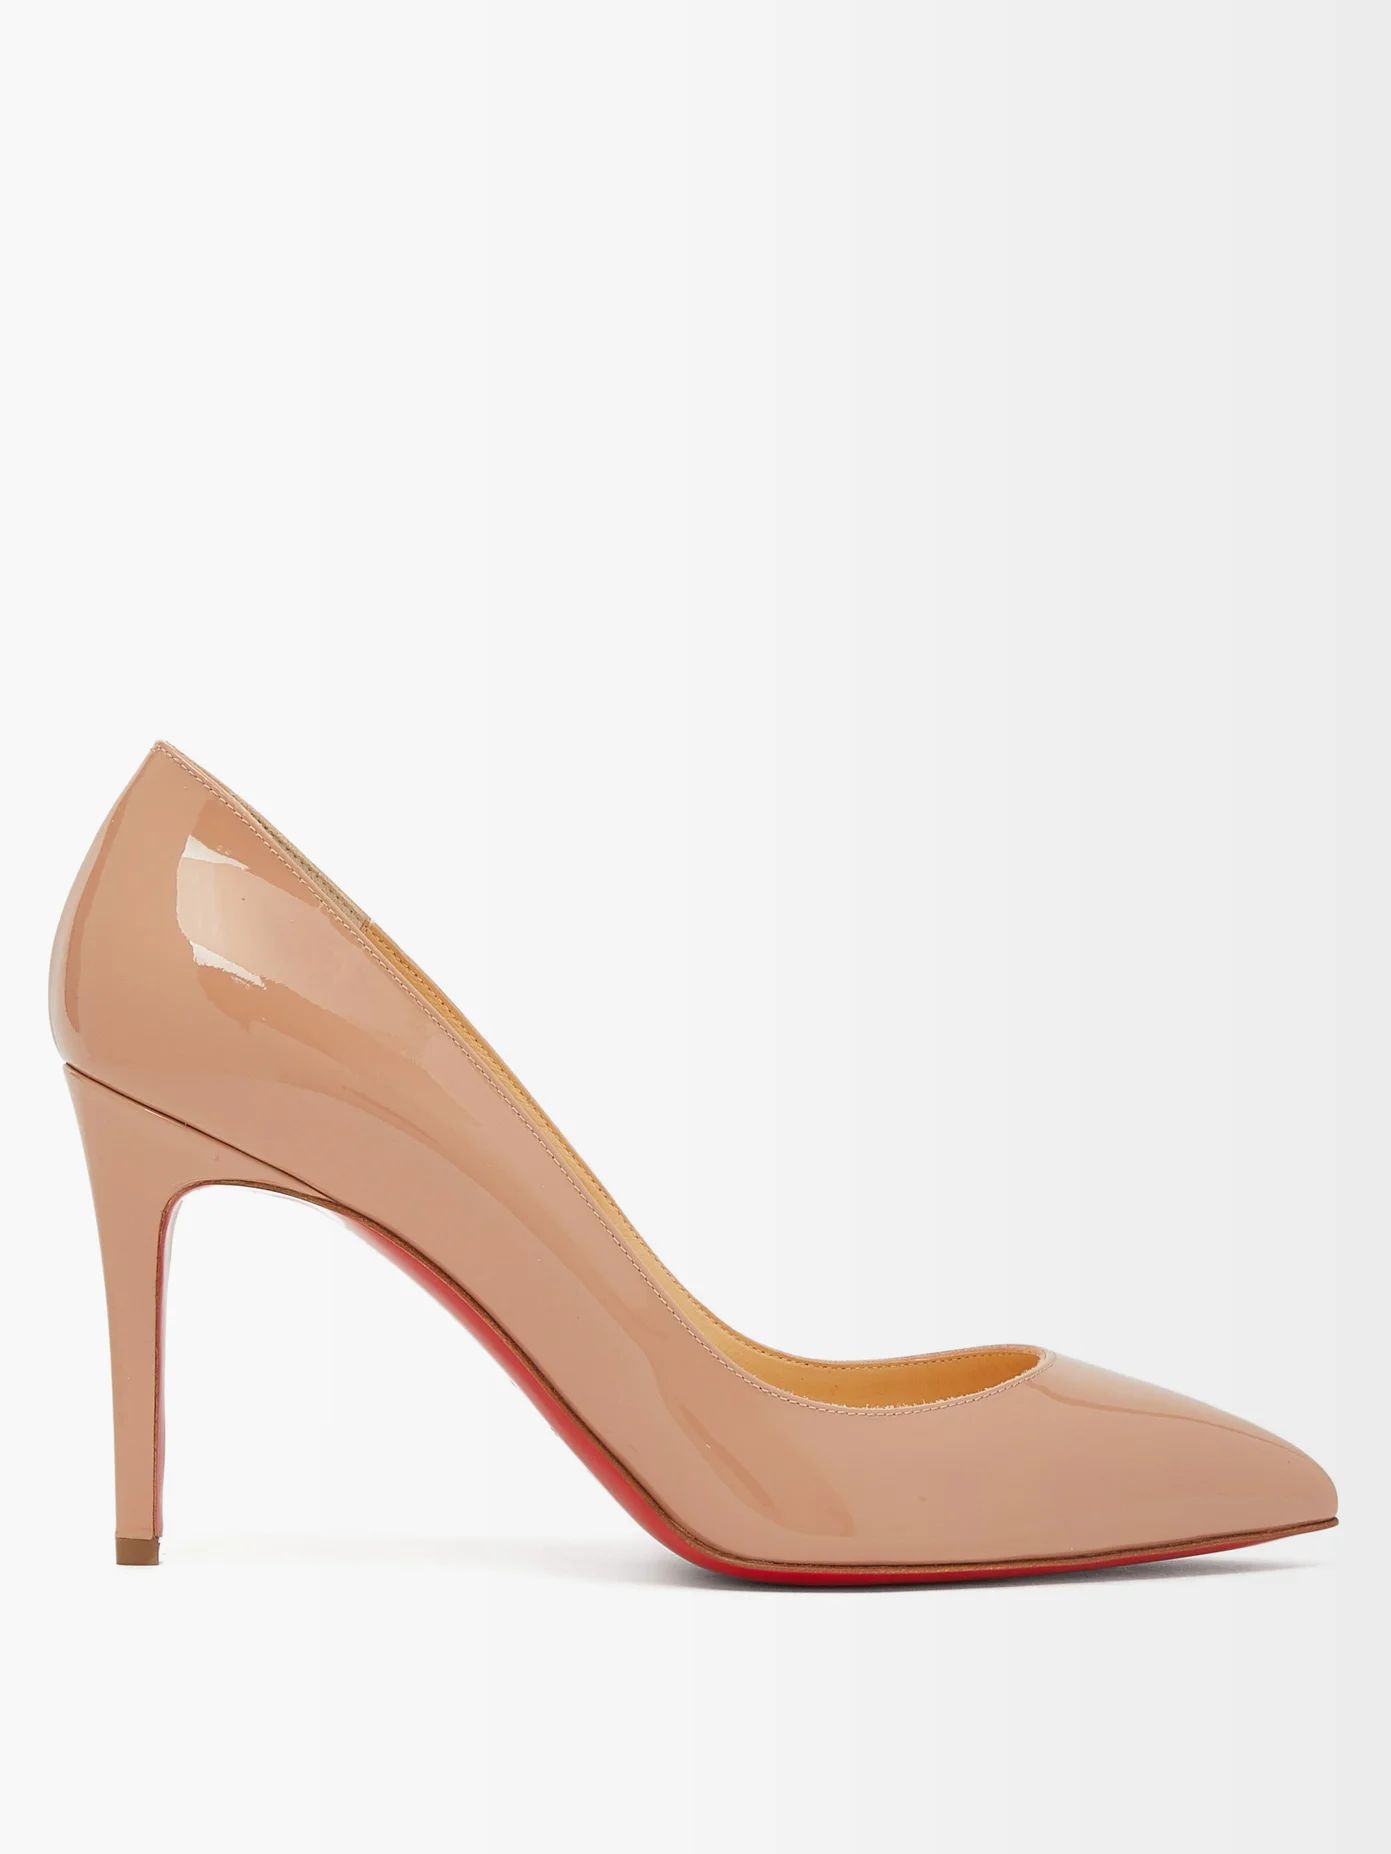 Pigalle 85 patent-leather pumps | Matches (US)